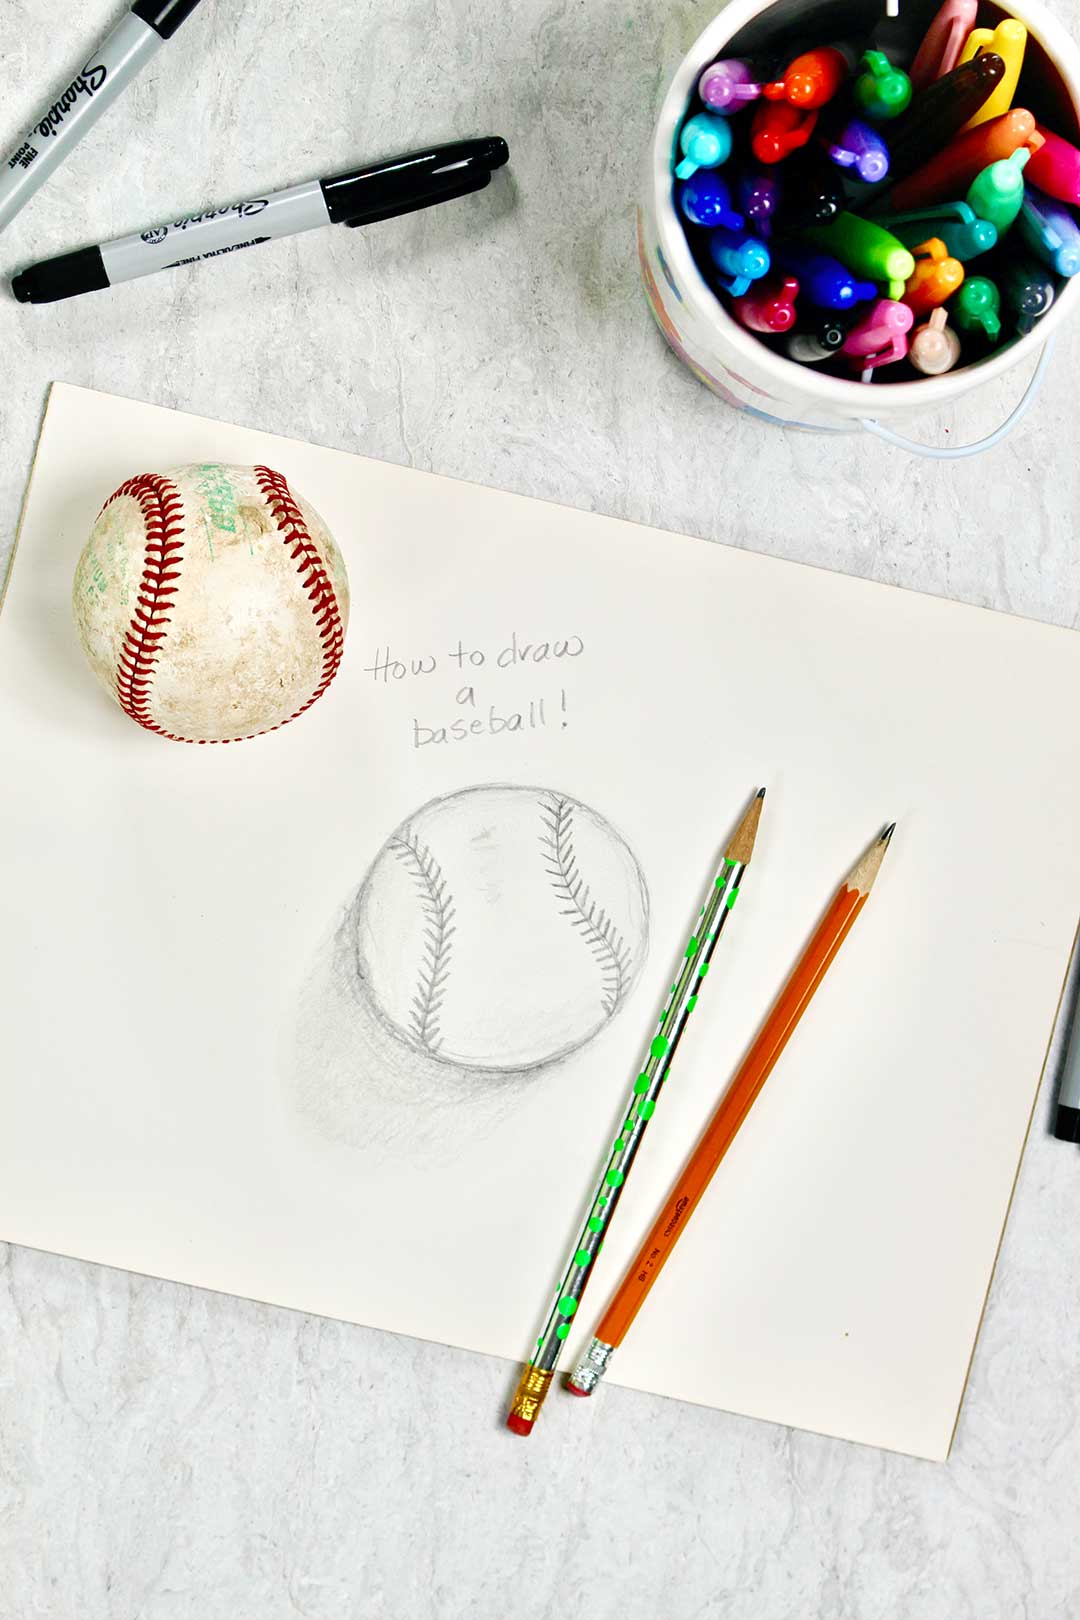 Final drawing of a baseball with sharpies, pencil and baseball nearby.